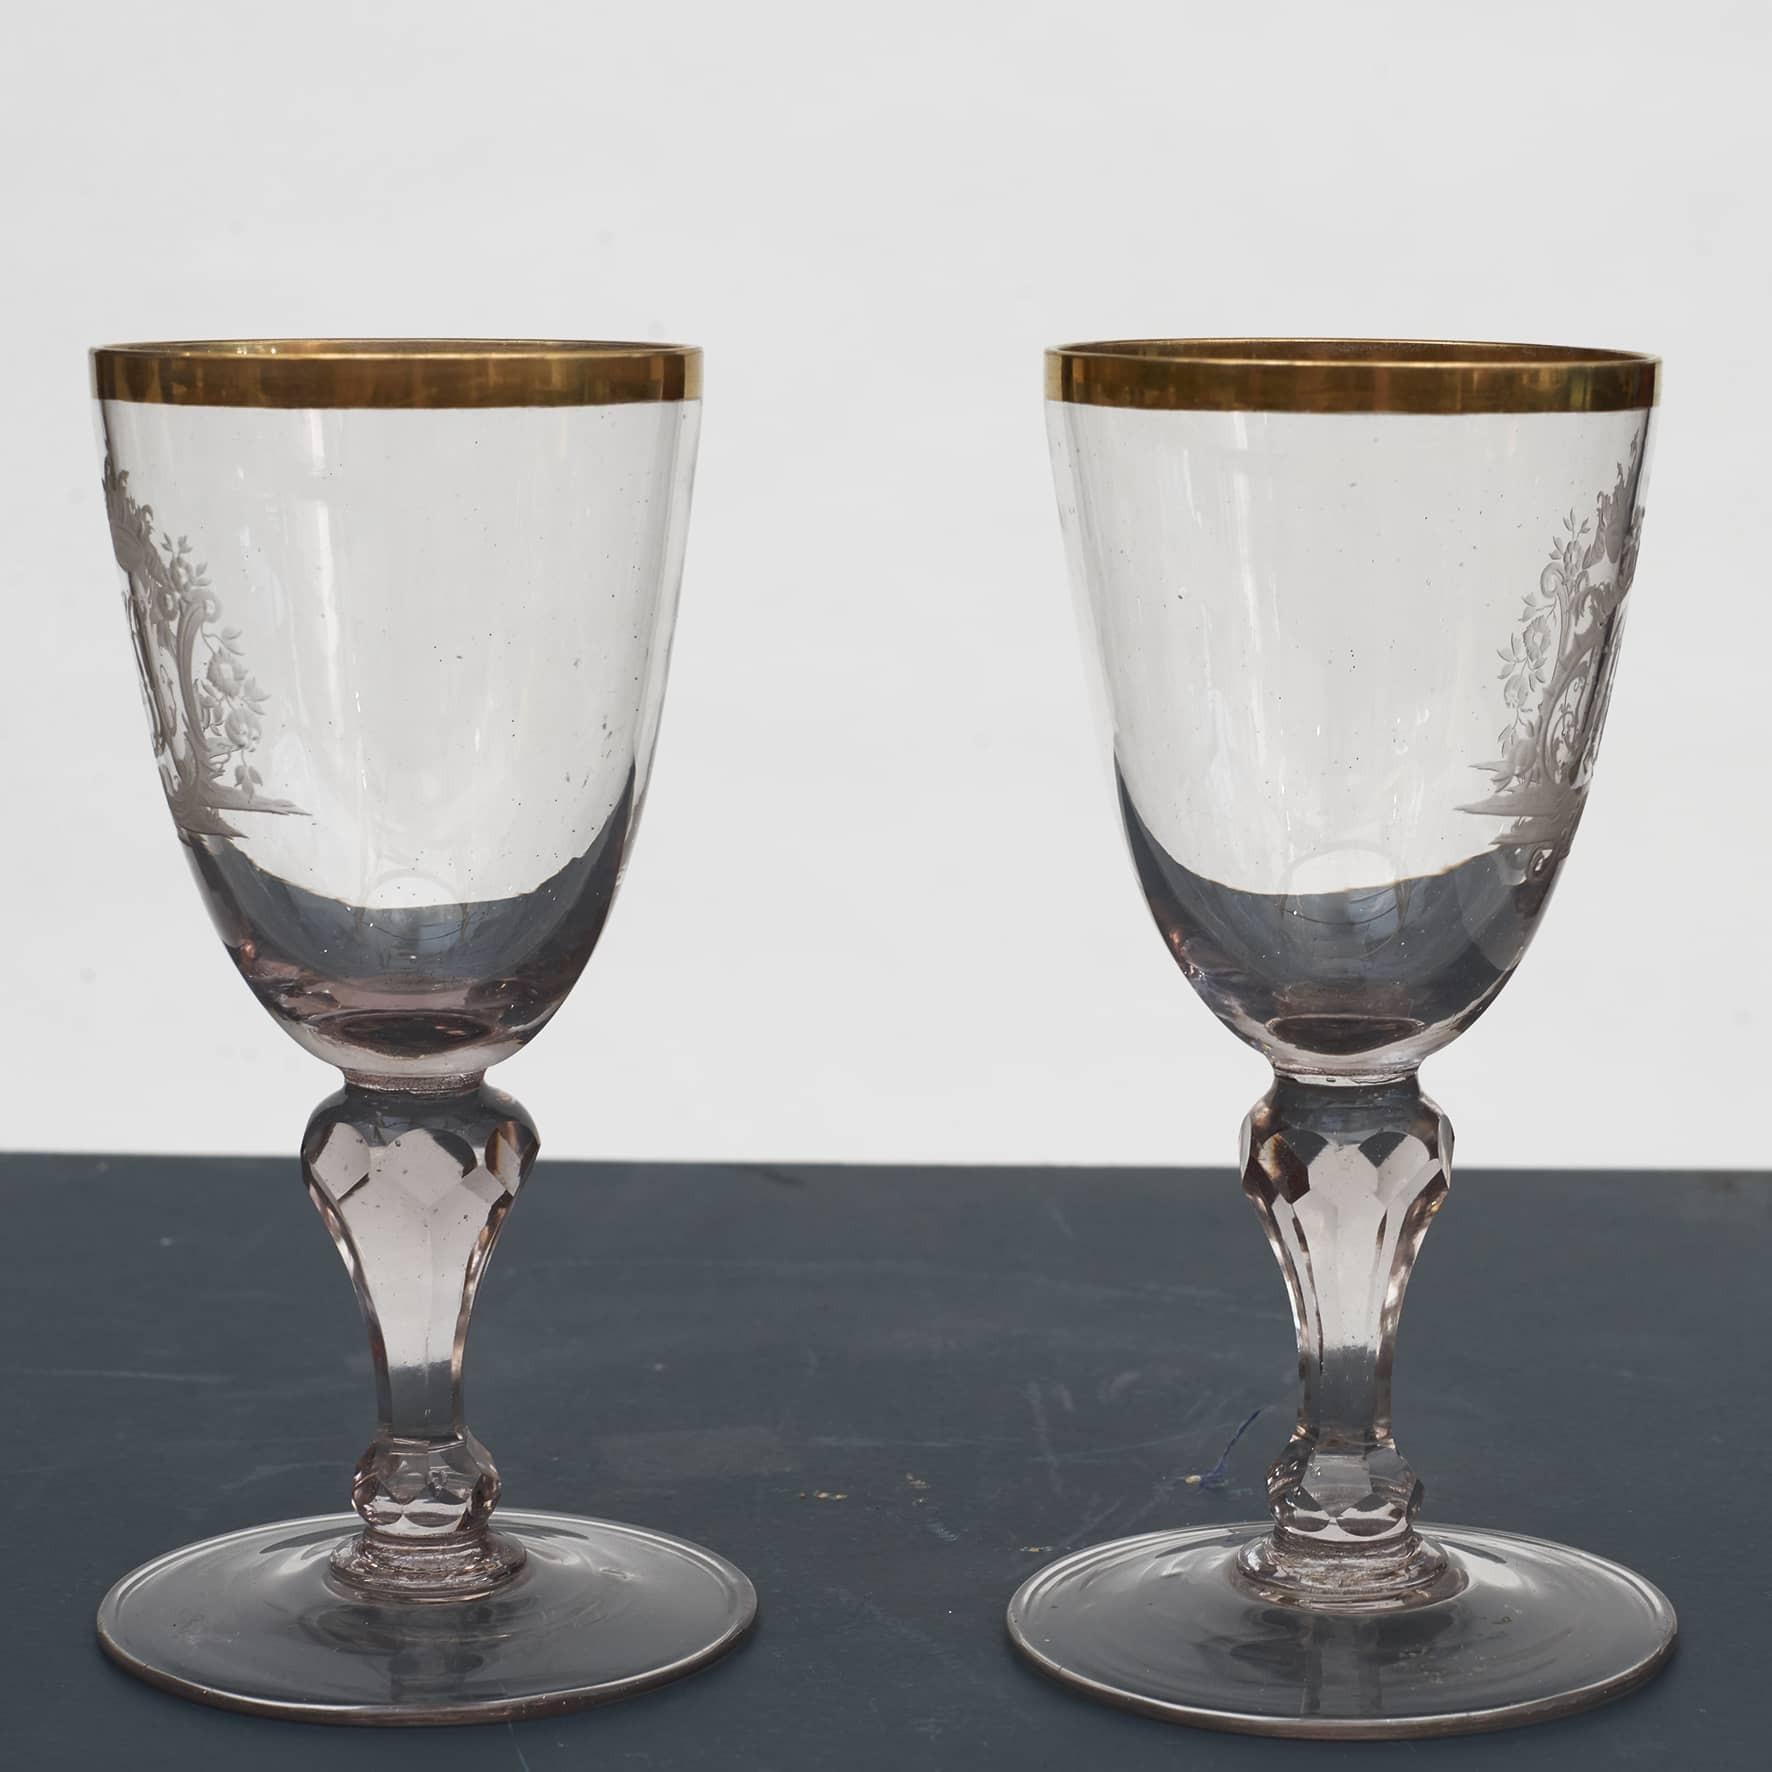 Gilt Pair Of 18Th Century Monogrammed Baroque wine Glasses For Sale